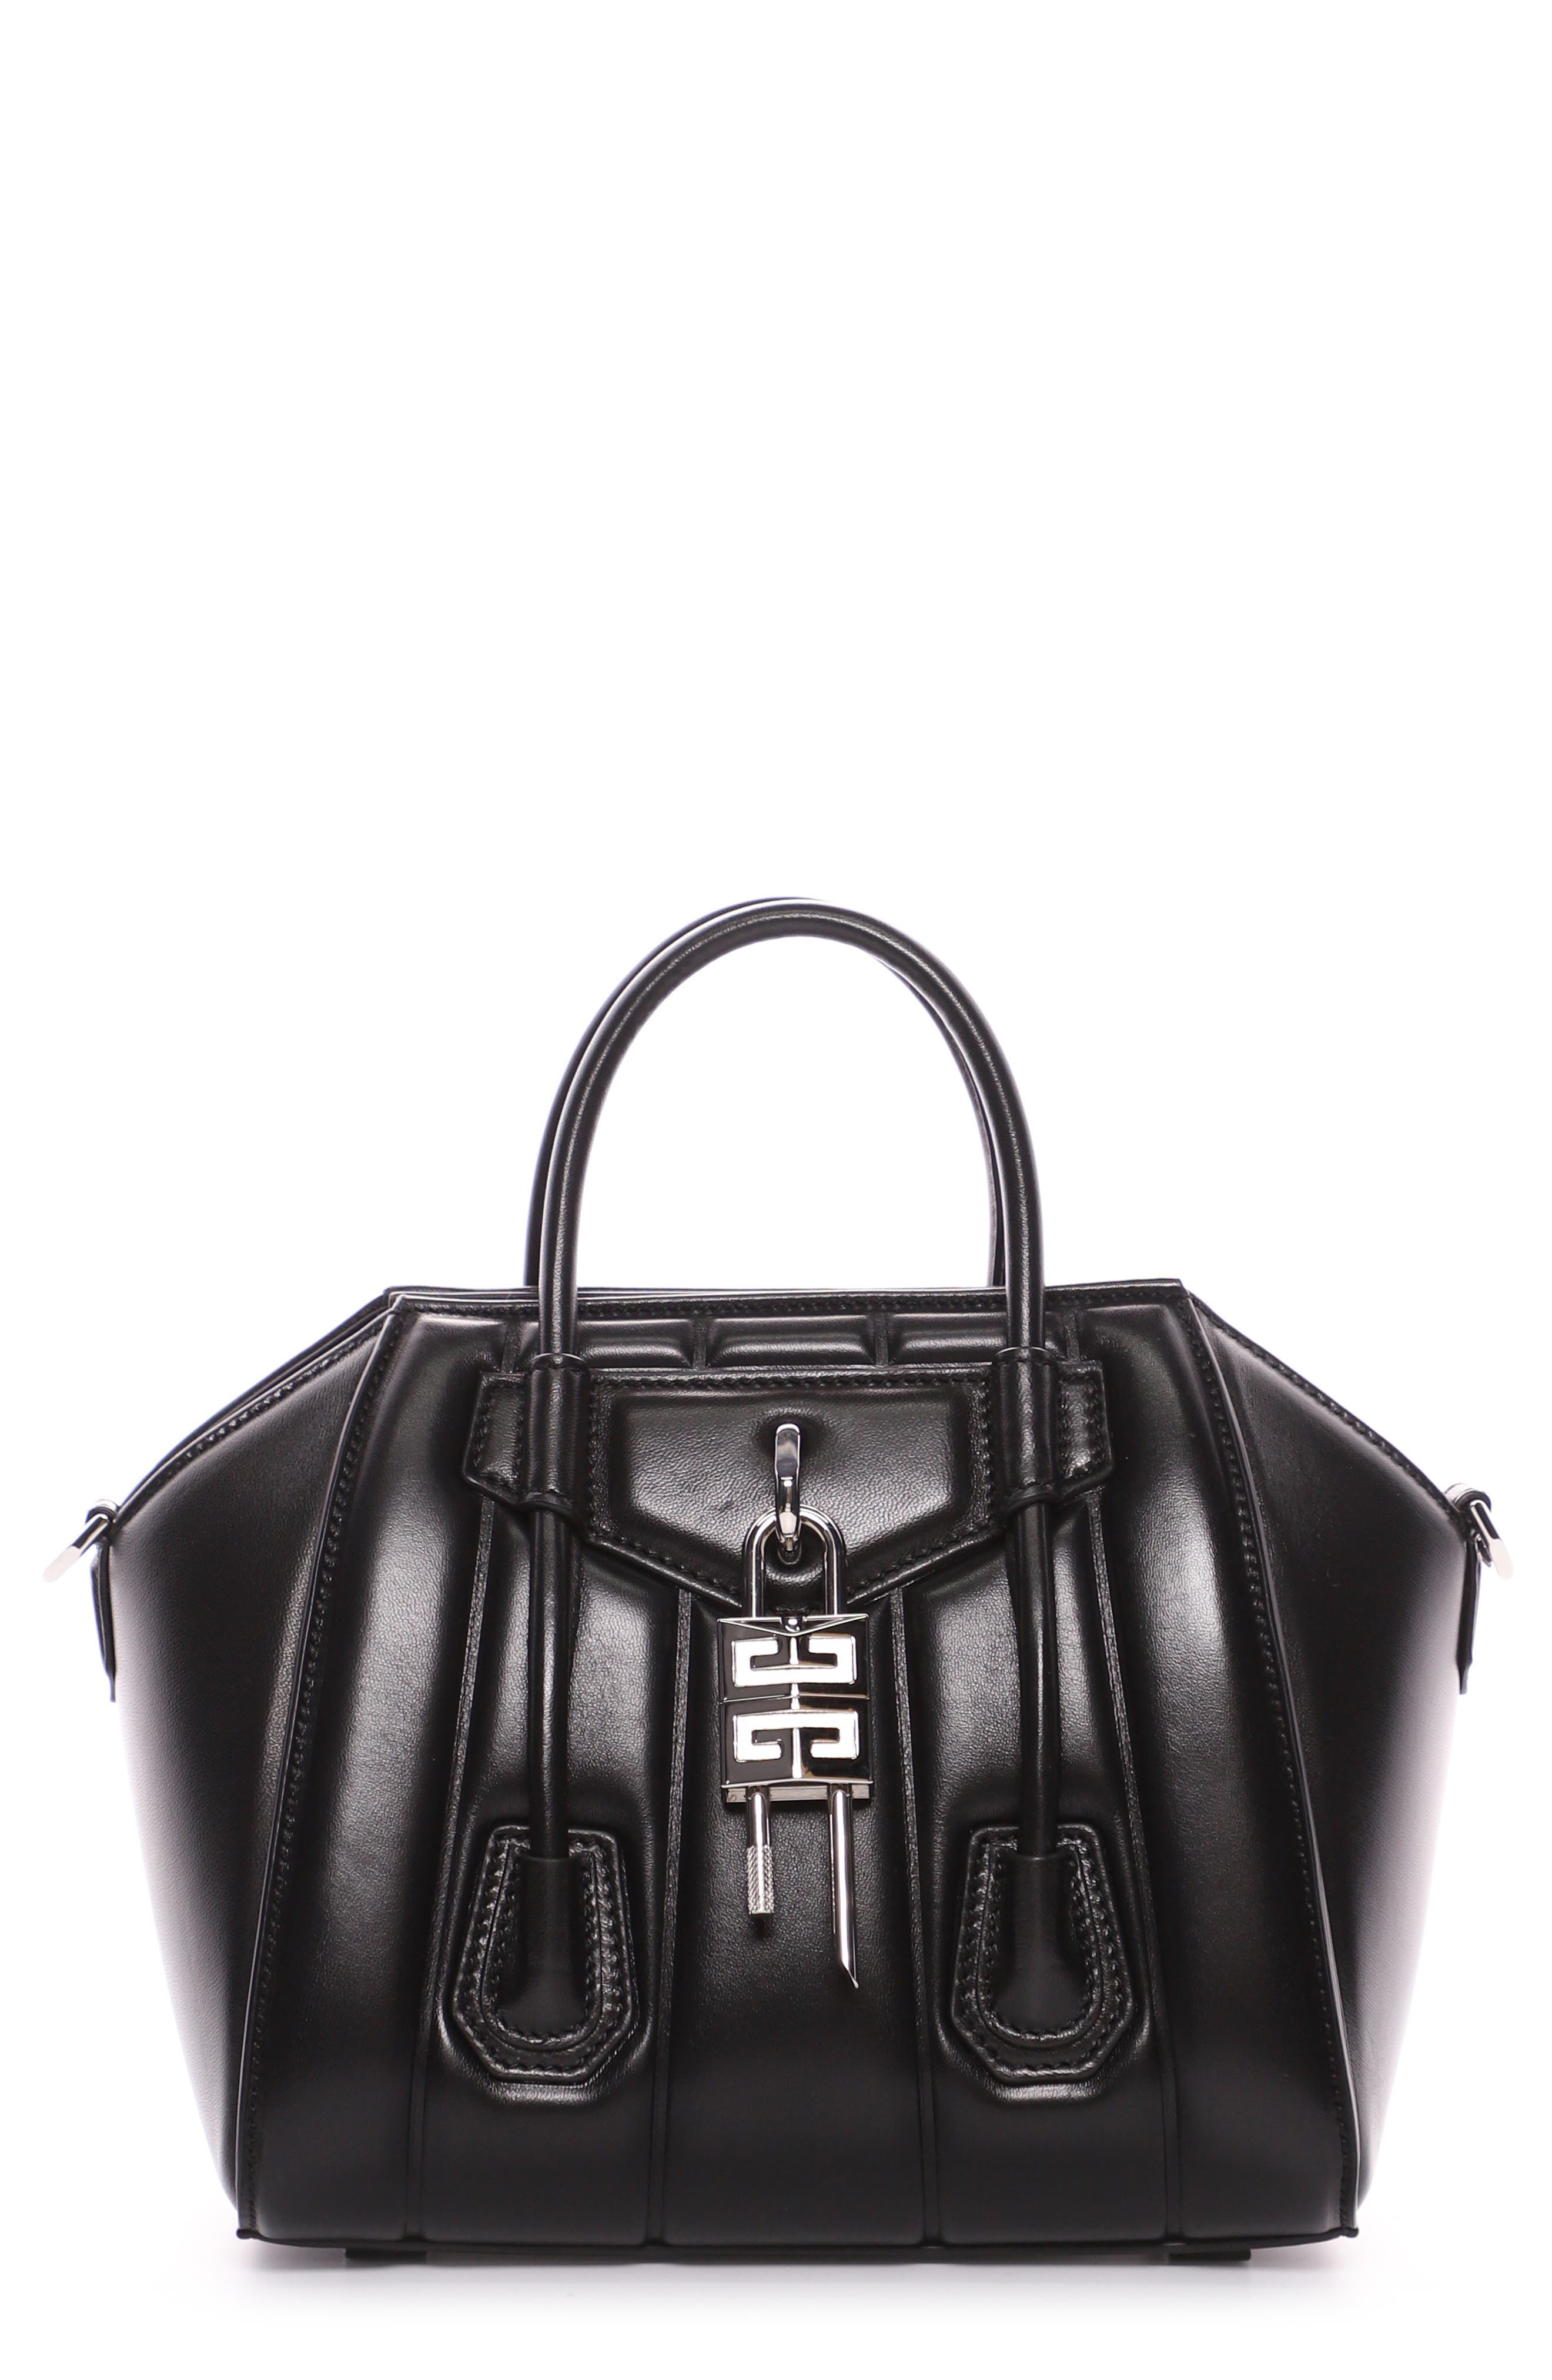 Givenchy Mini Antigona Lock Quilted Leather Satchel in Black